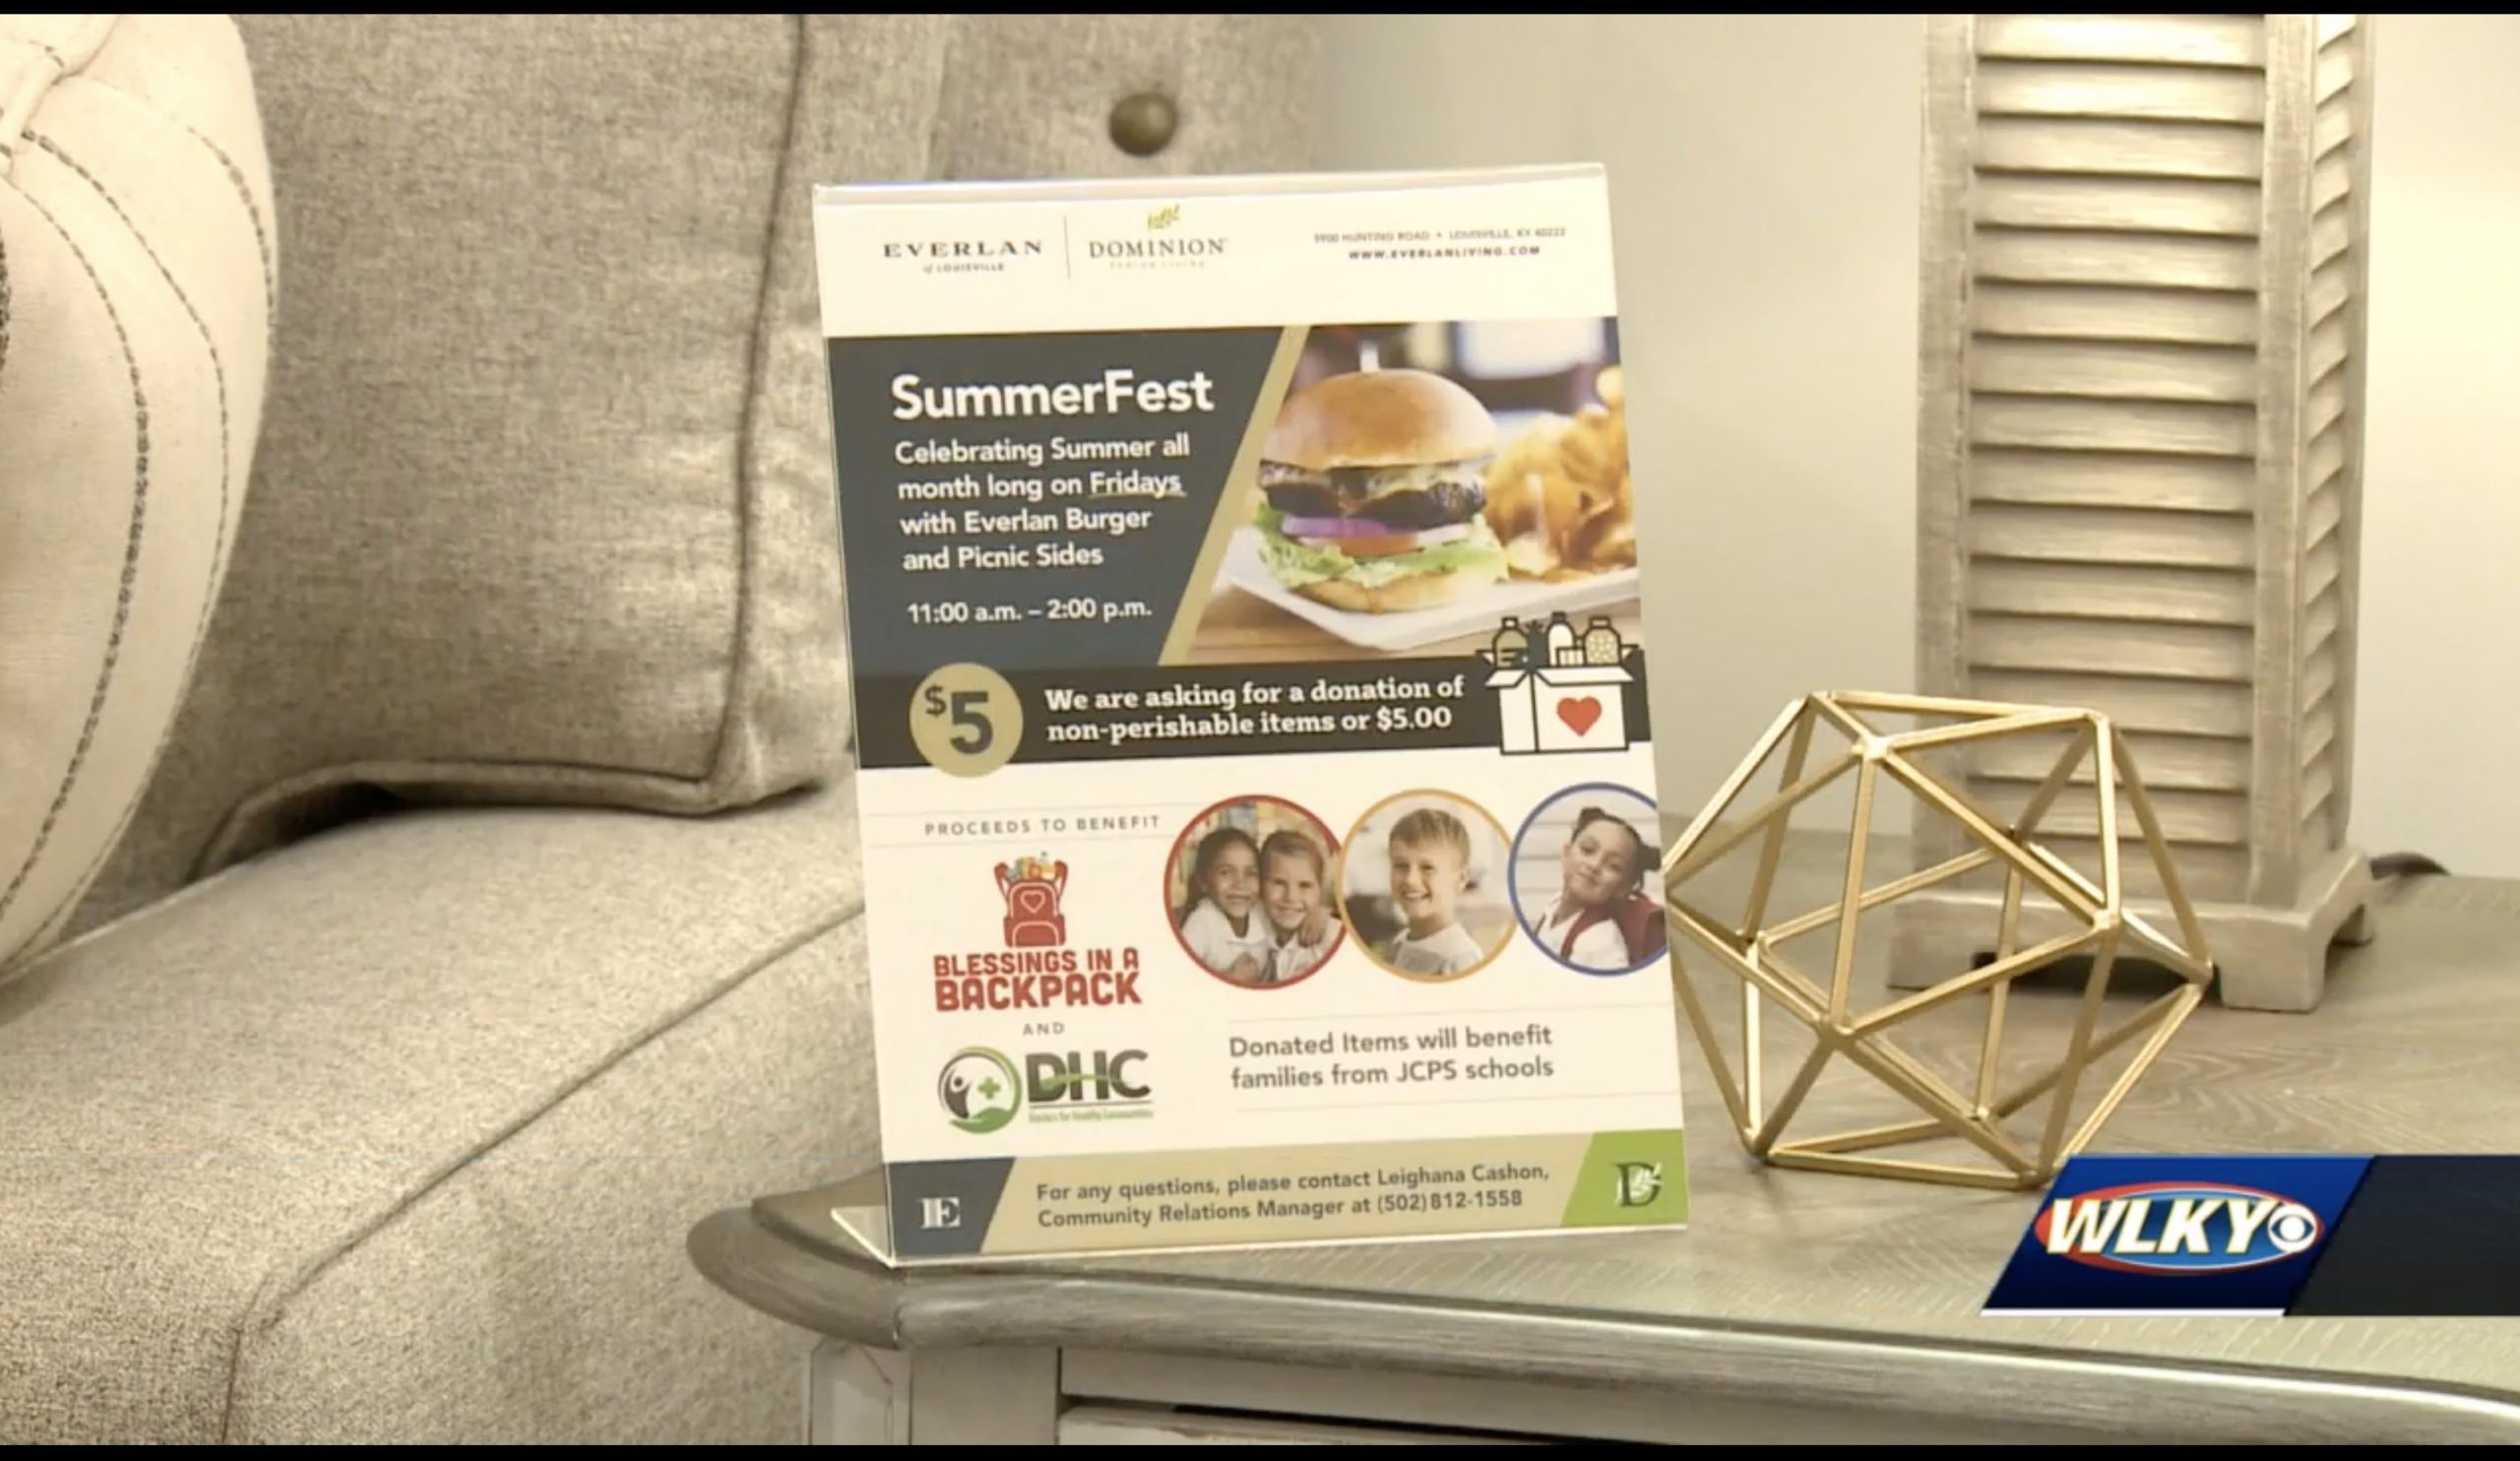 Louisville senior living facility hosting to-go picnics benefitting Blessings in a Backpack